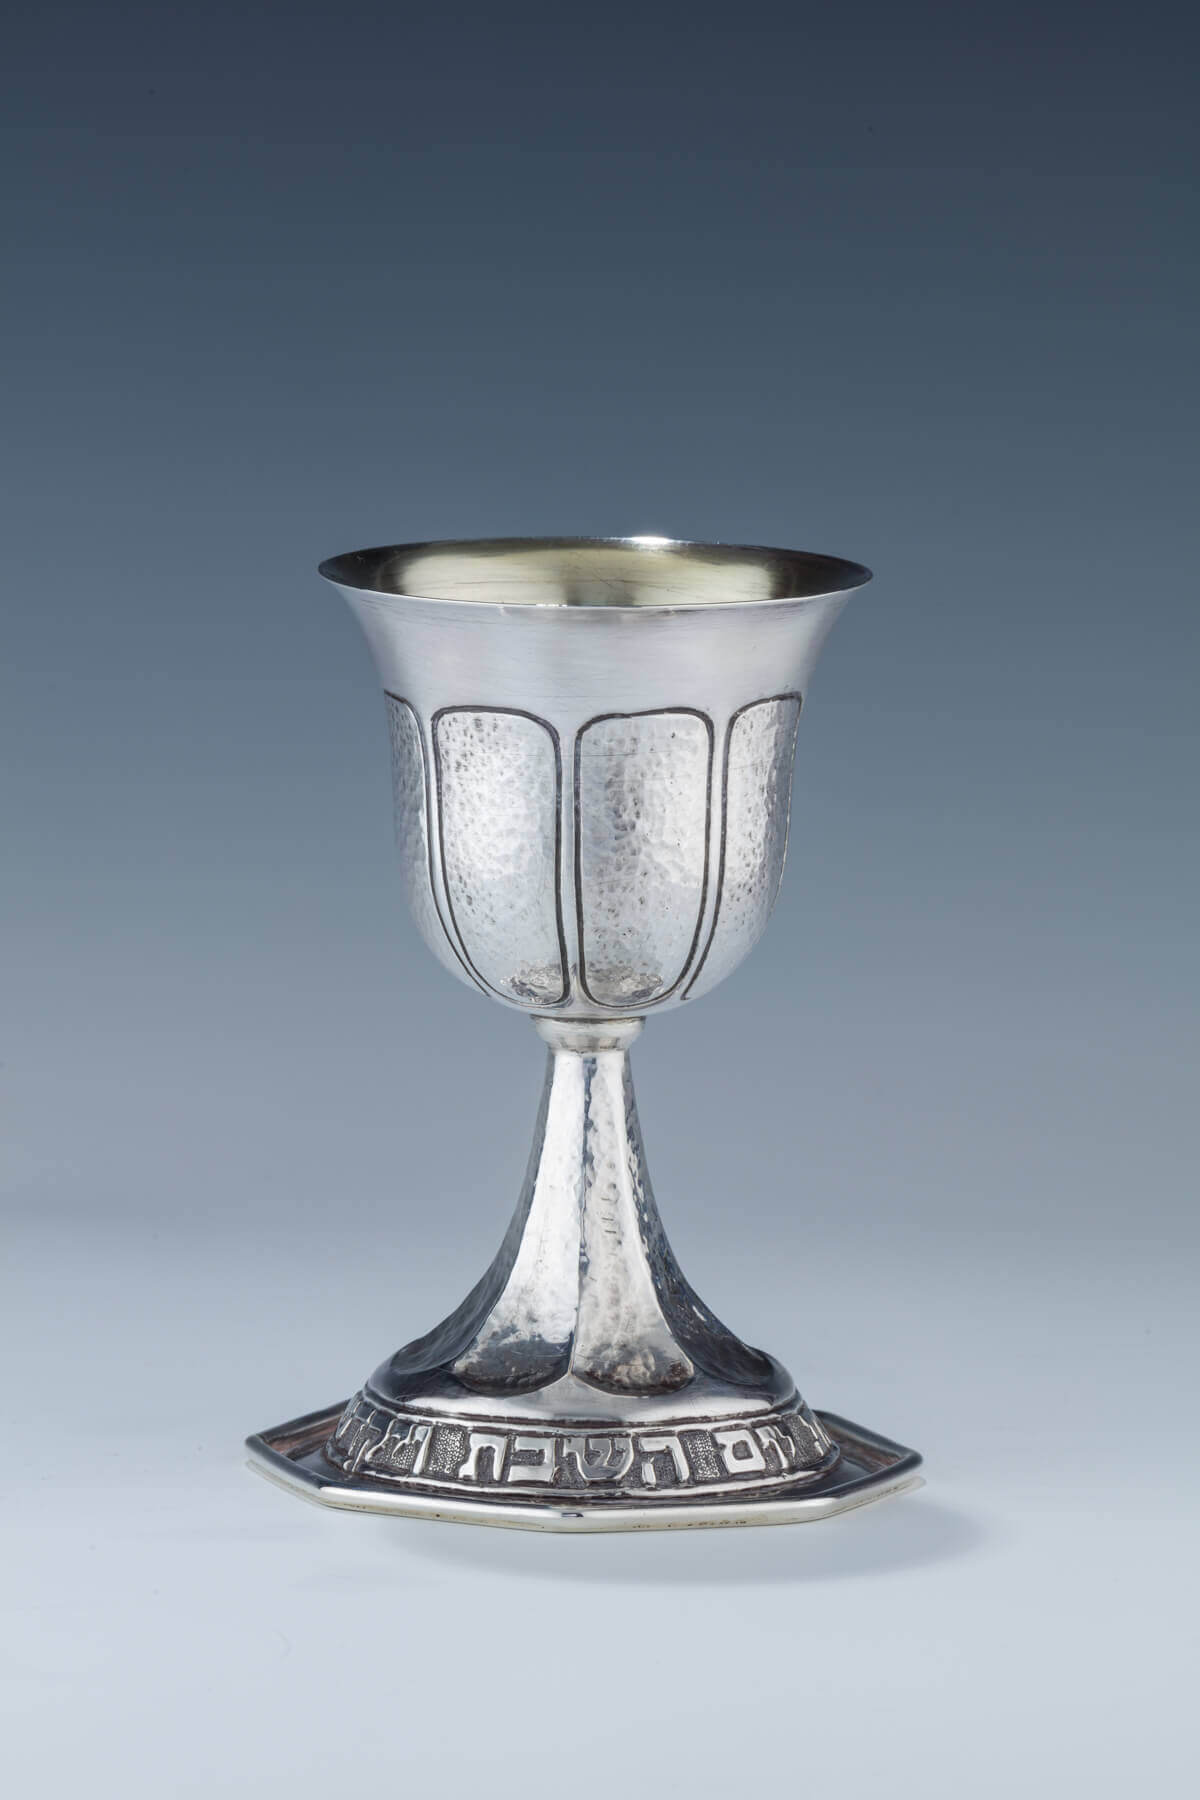 136. AN EXCEPTIONAL SILVER KIDDUSH CUP BY FRIEDLANDER